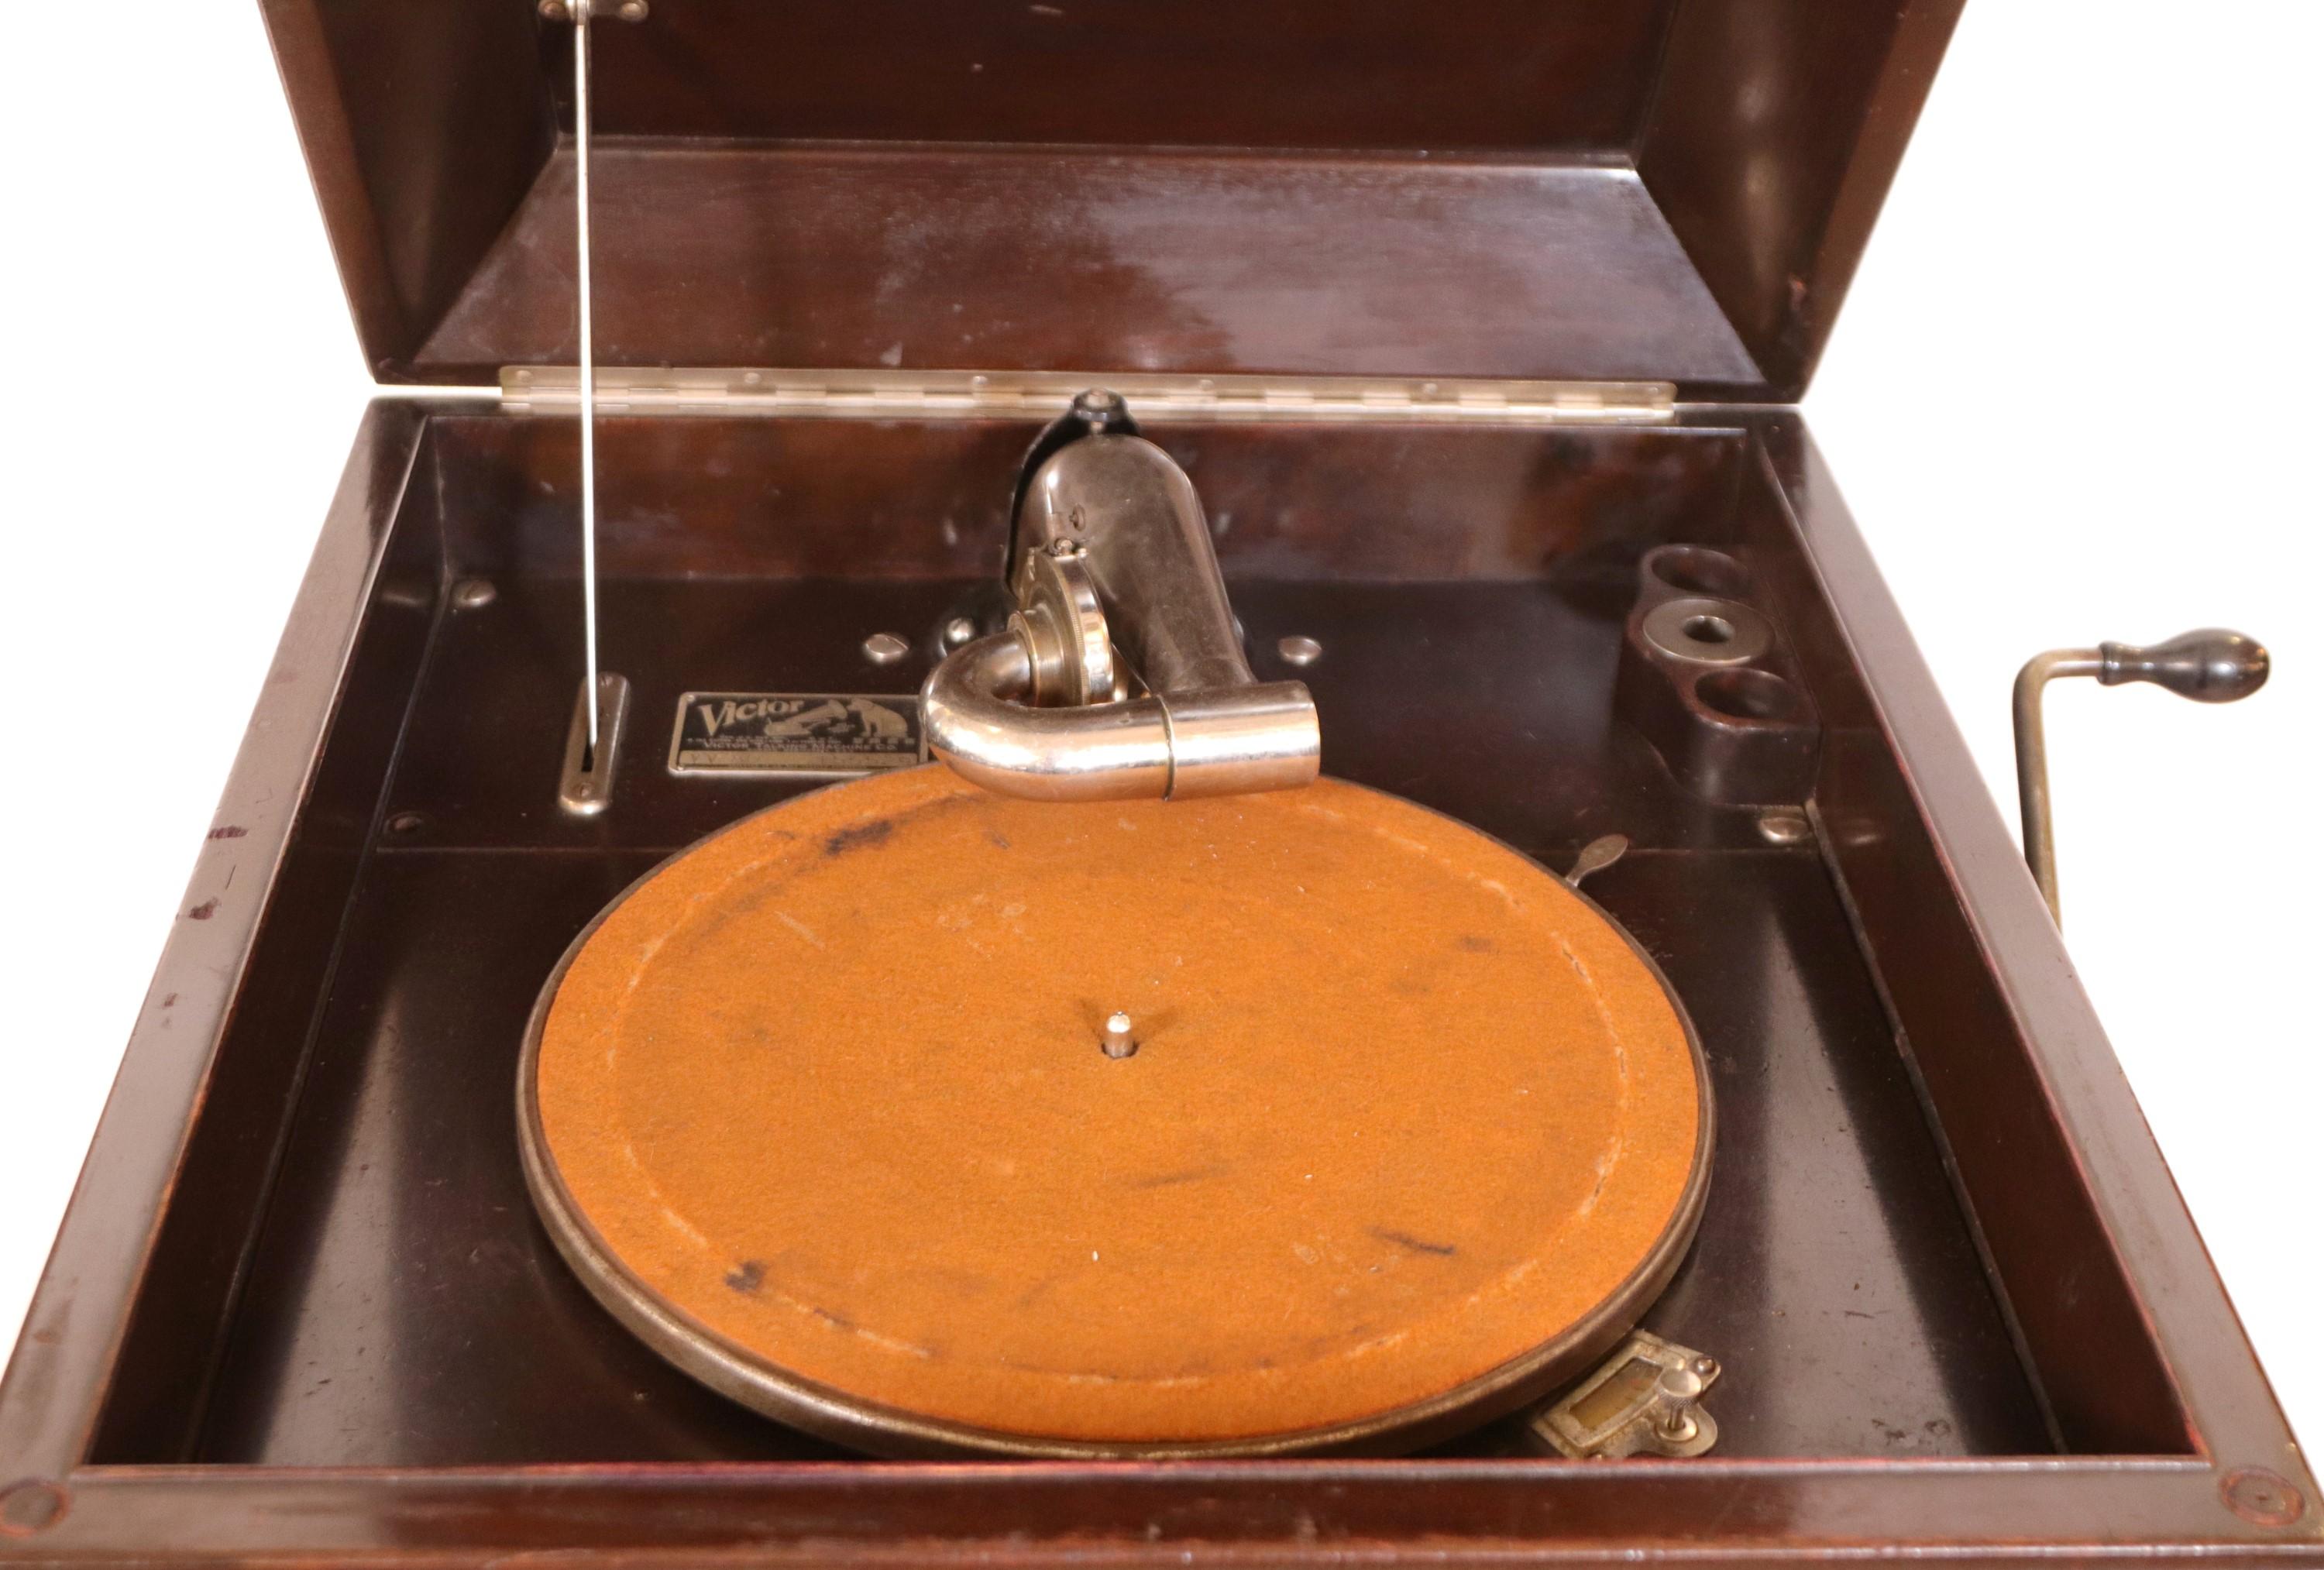 victrola record player antique